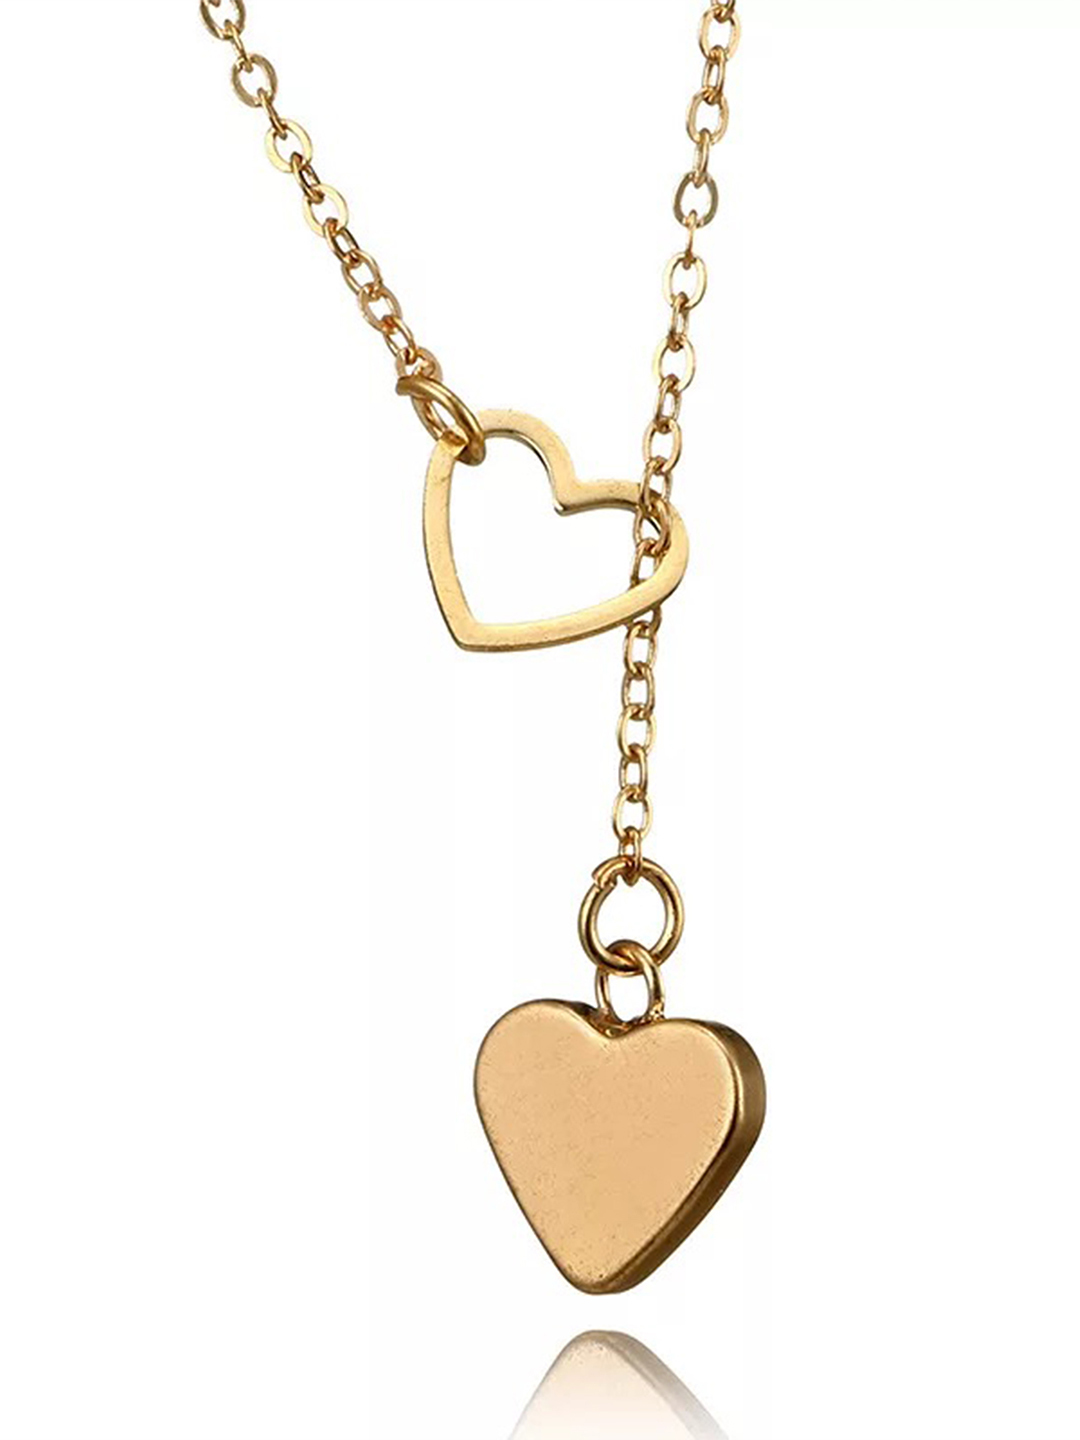 Stunning Gold Plated Y-Shaped Drop Heart Pendant Necklace